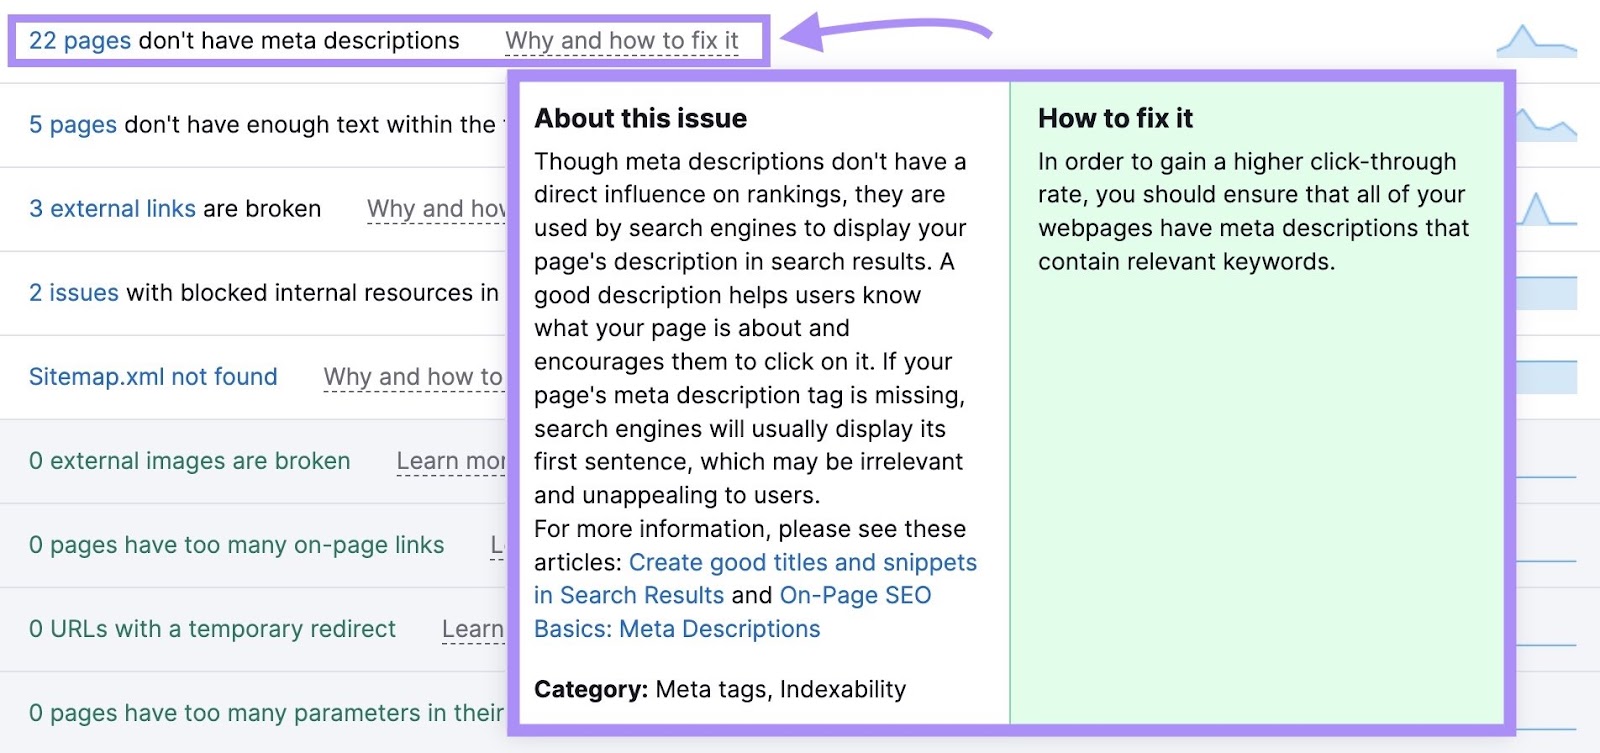 “Why and how to fix it” window explaining pages missing meta description, and how to fix it